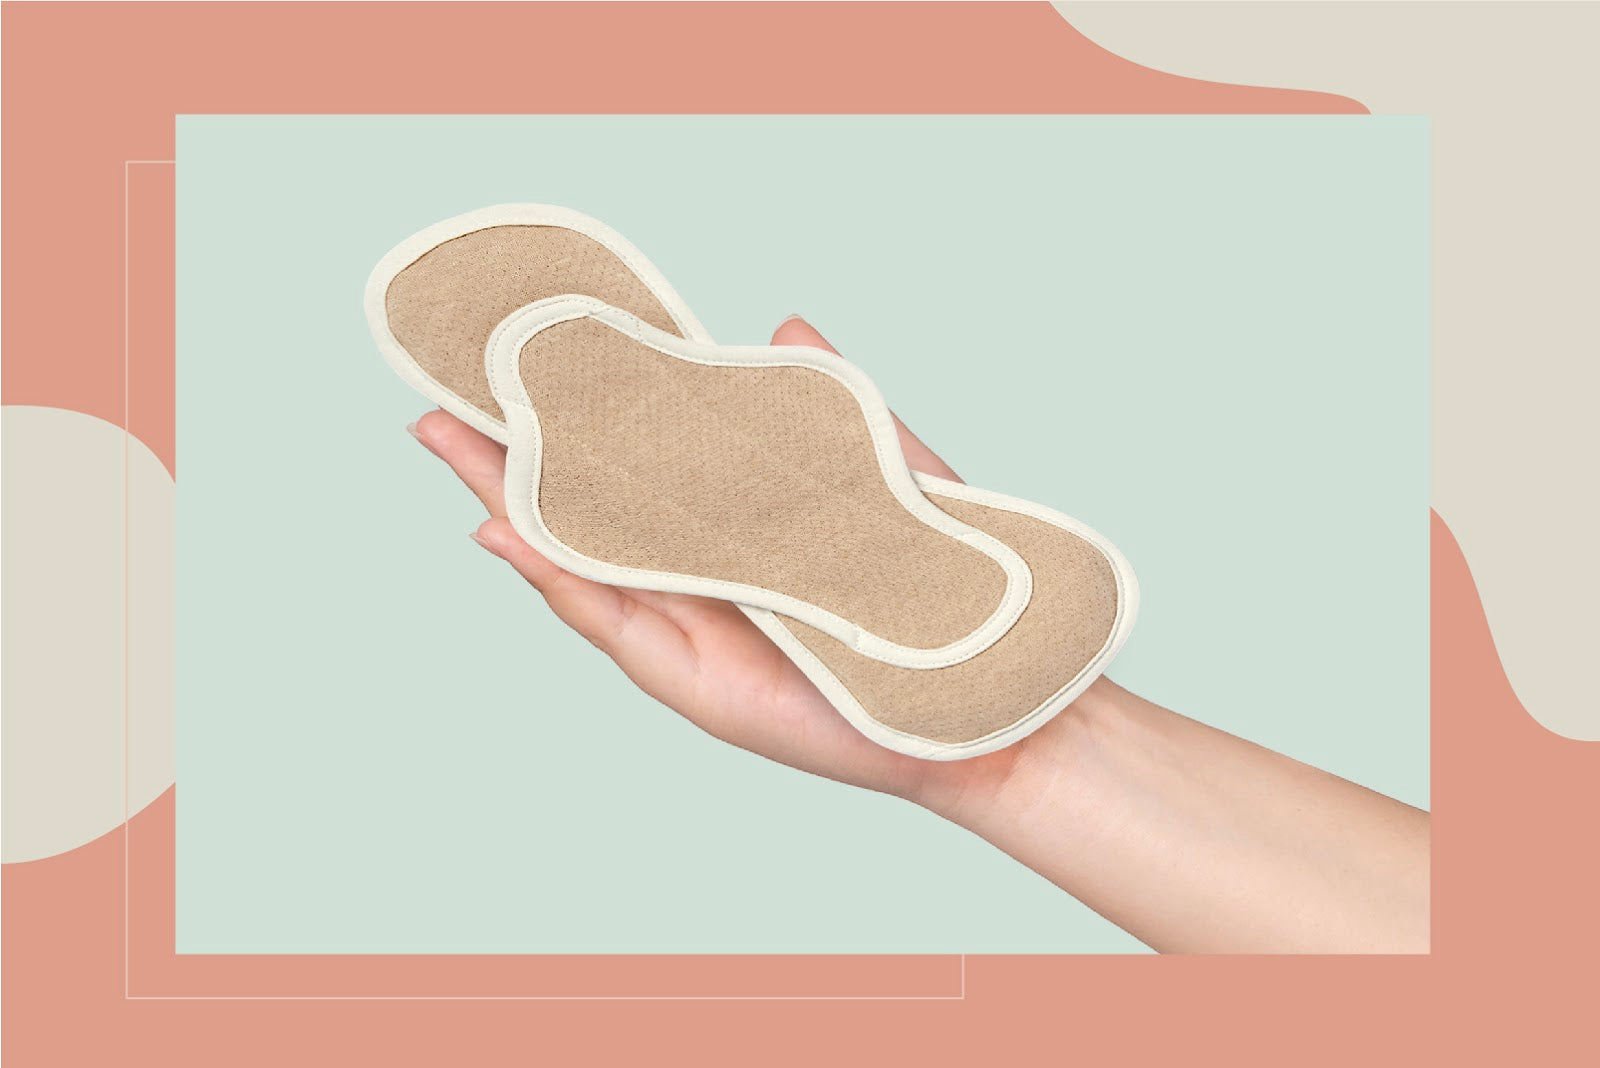 How To Use, Wash & Care For Your Reusable Sanitary Pads – The